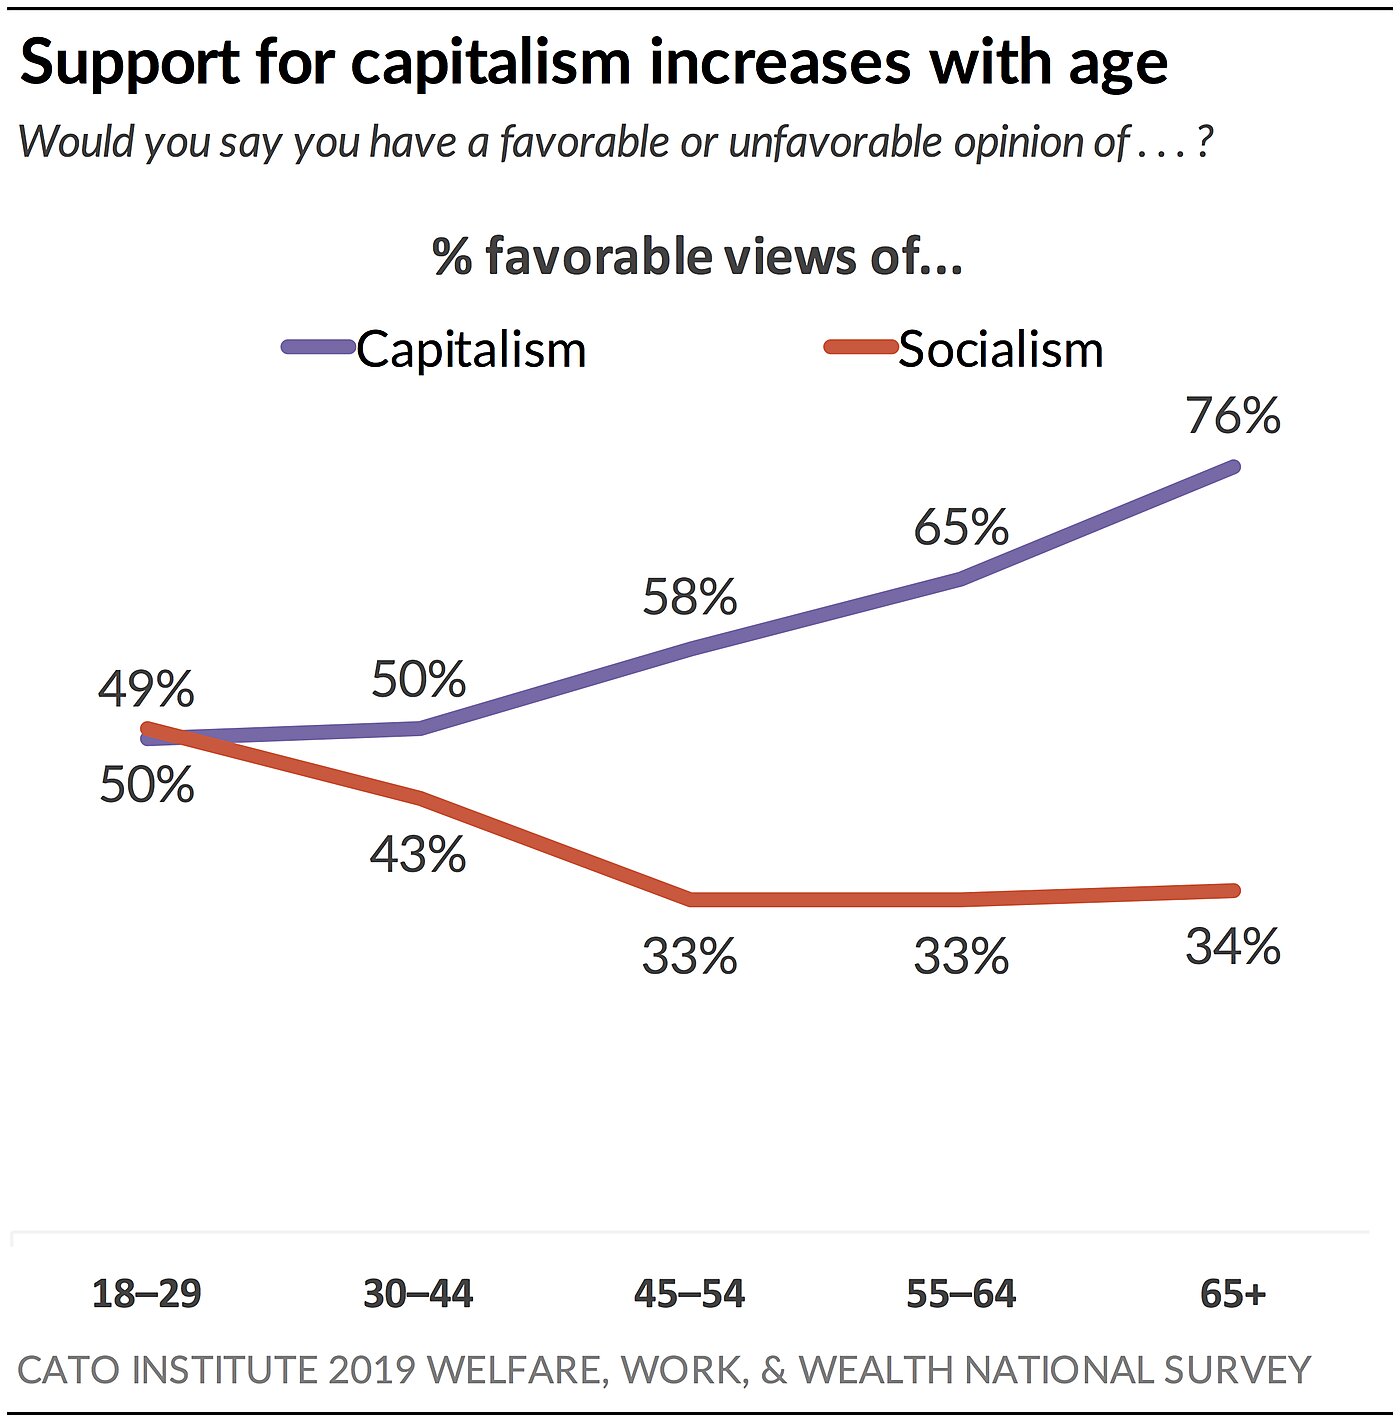 Support for capitalism increases with age